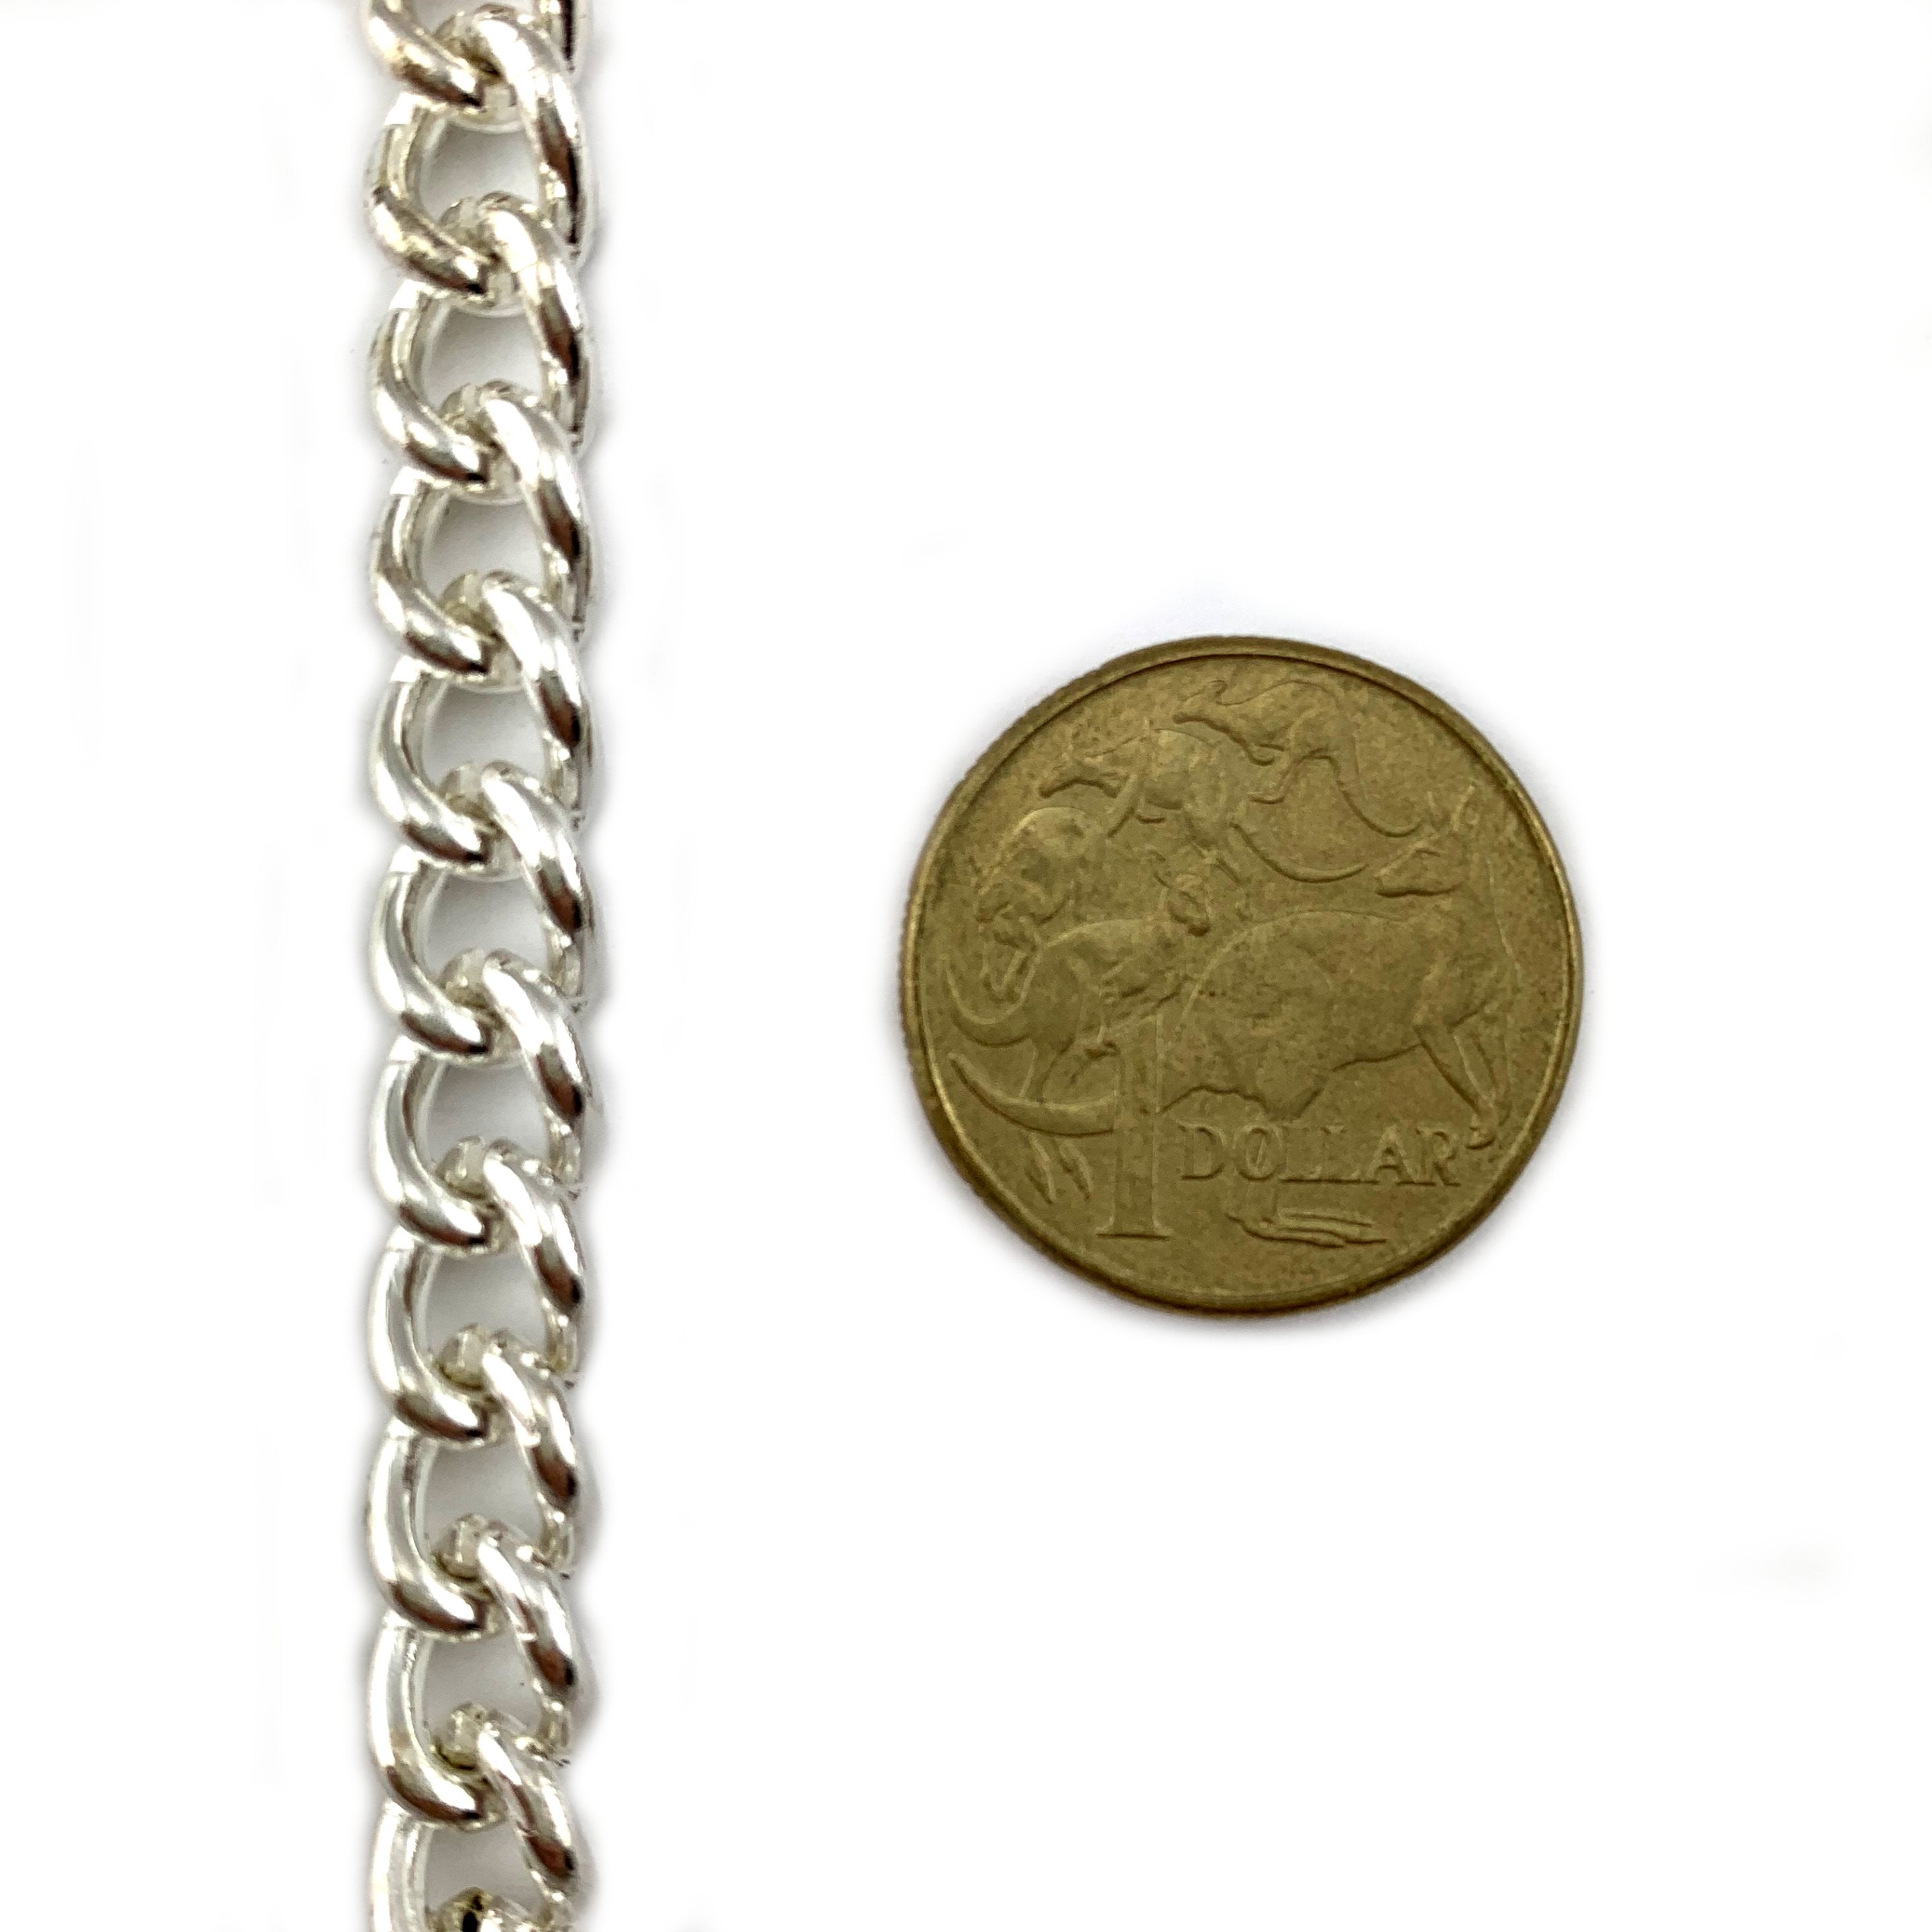 Curb Jewellery Chain - Silver Plated - Size C220. Melbourne, Australia.